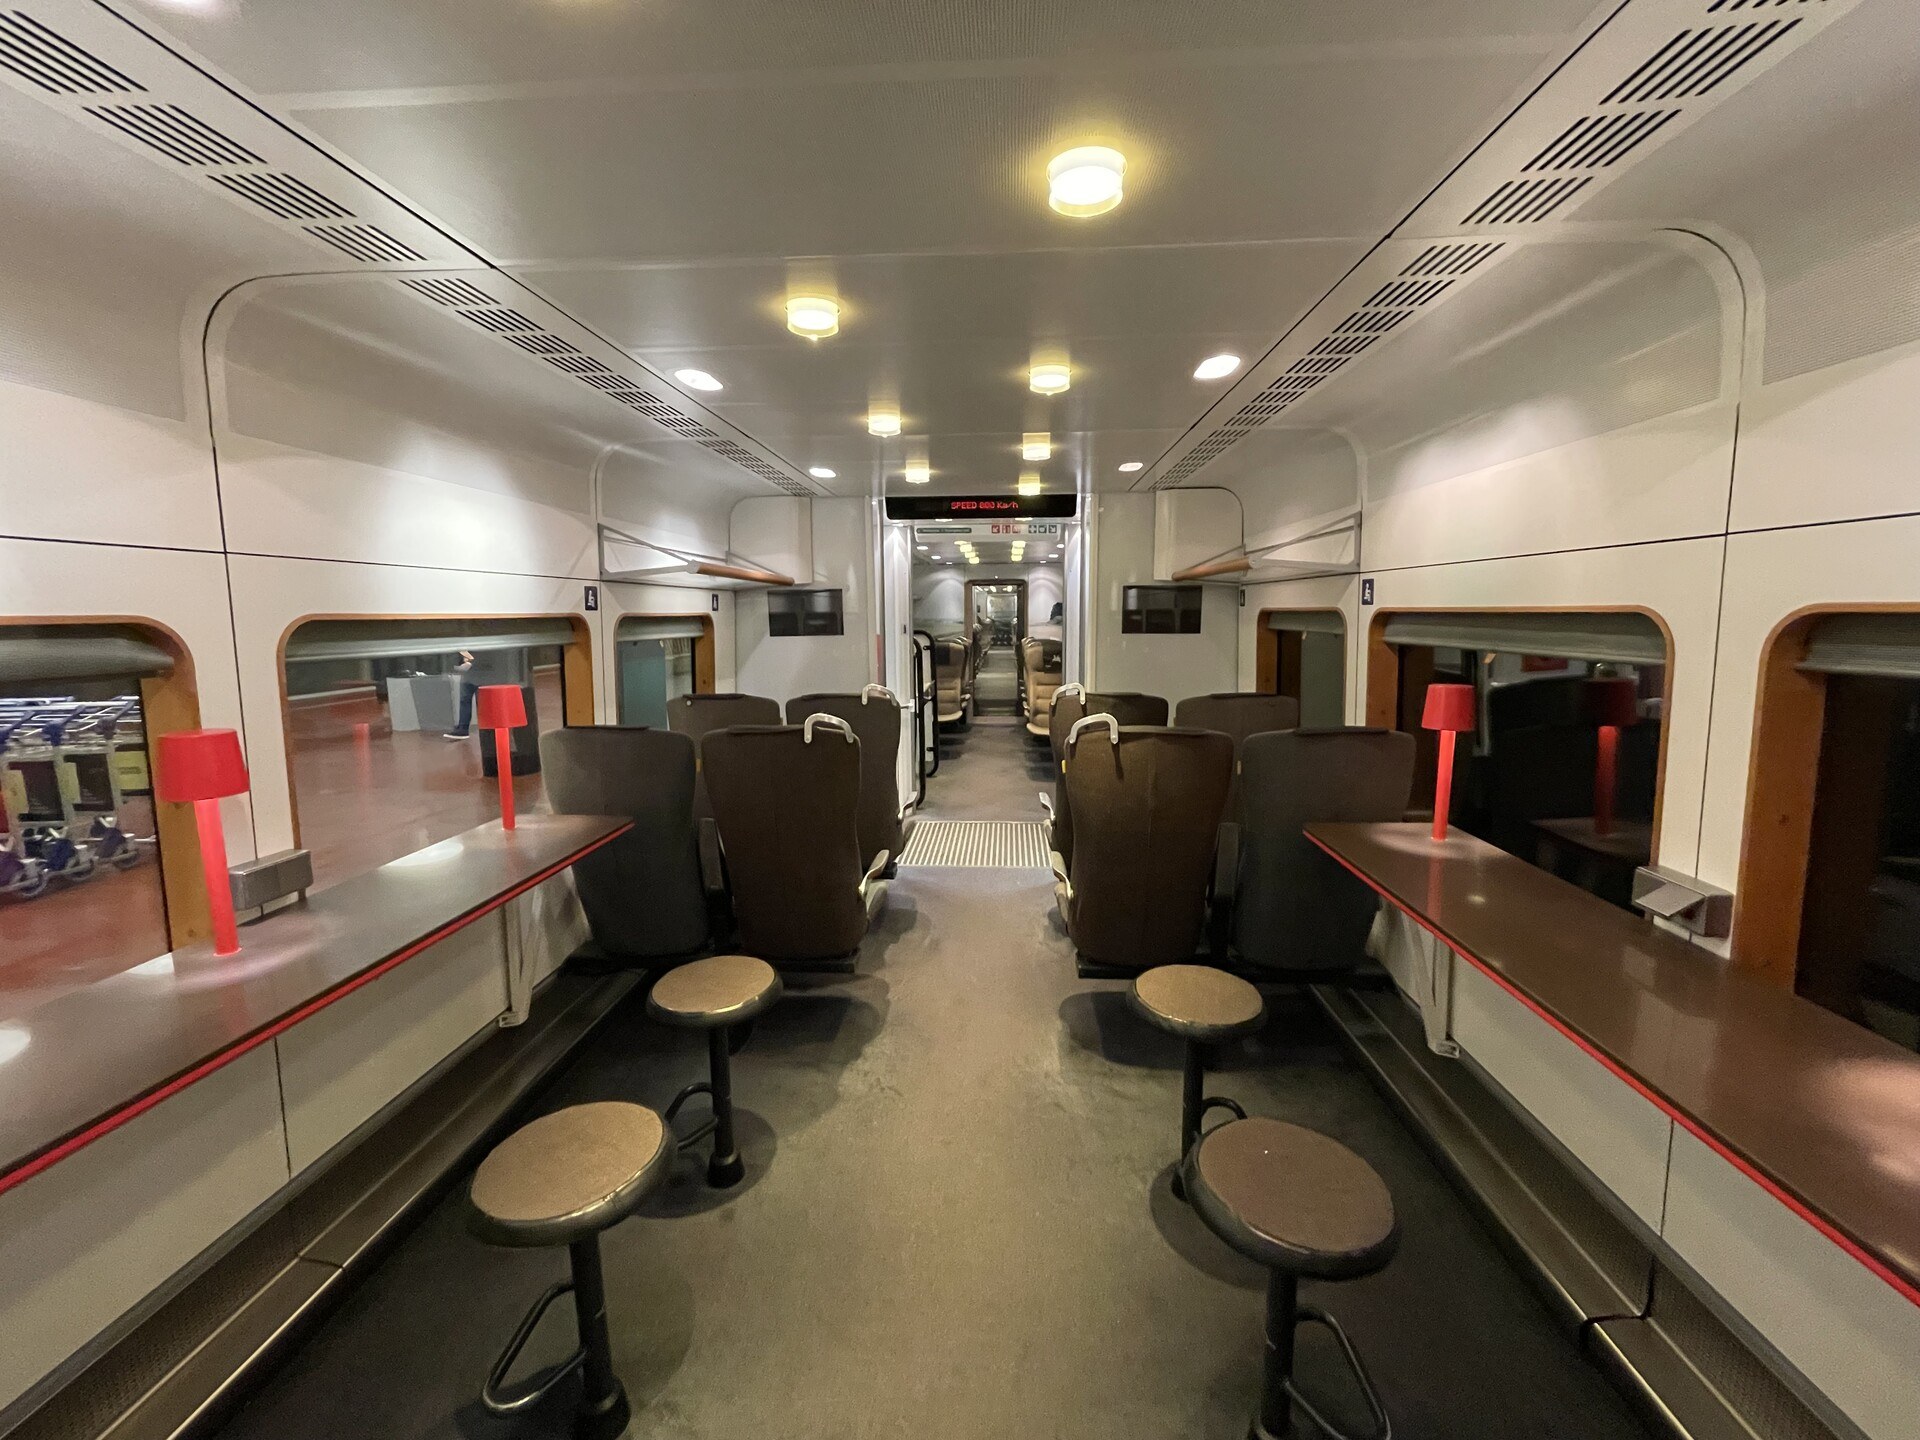 The interior of the dining car on a train that takes 18 minutes to reach its destination